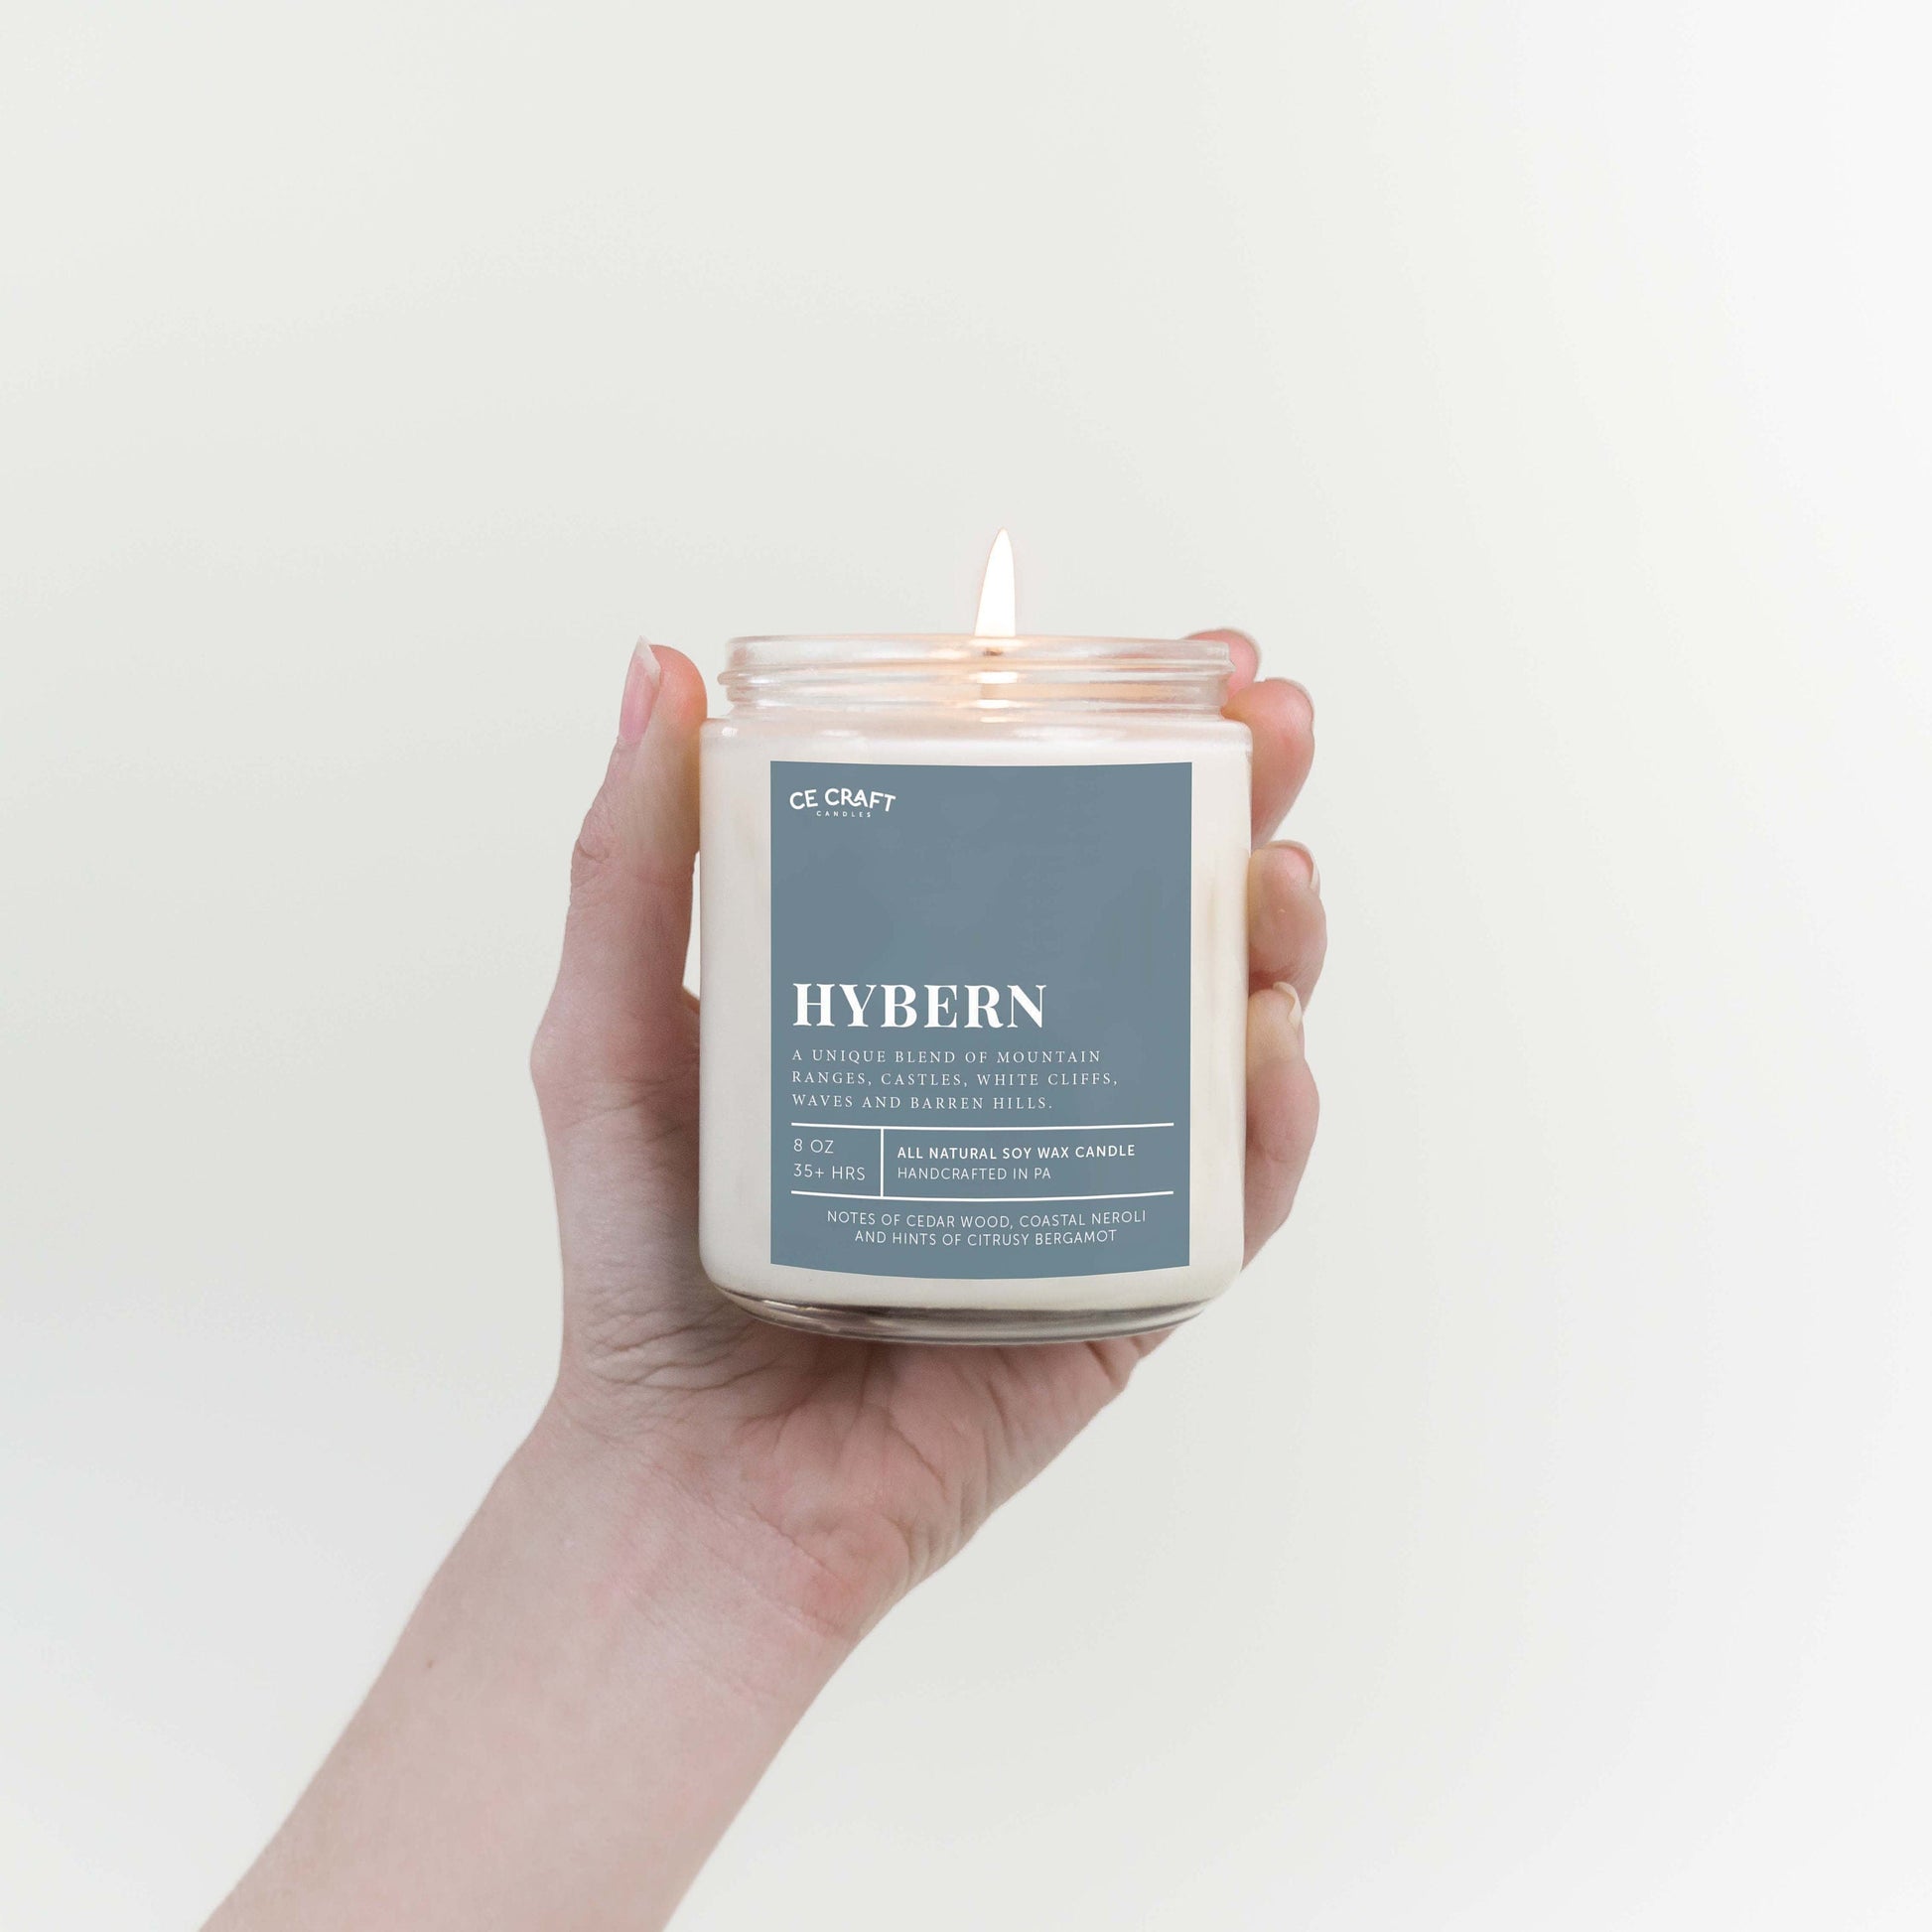 Hybern Scented Soy Wax Candle C & E Craft Co 